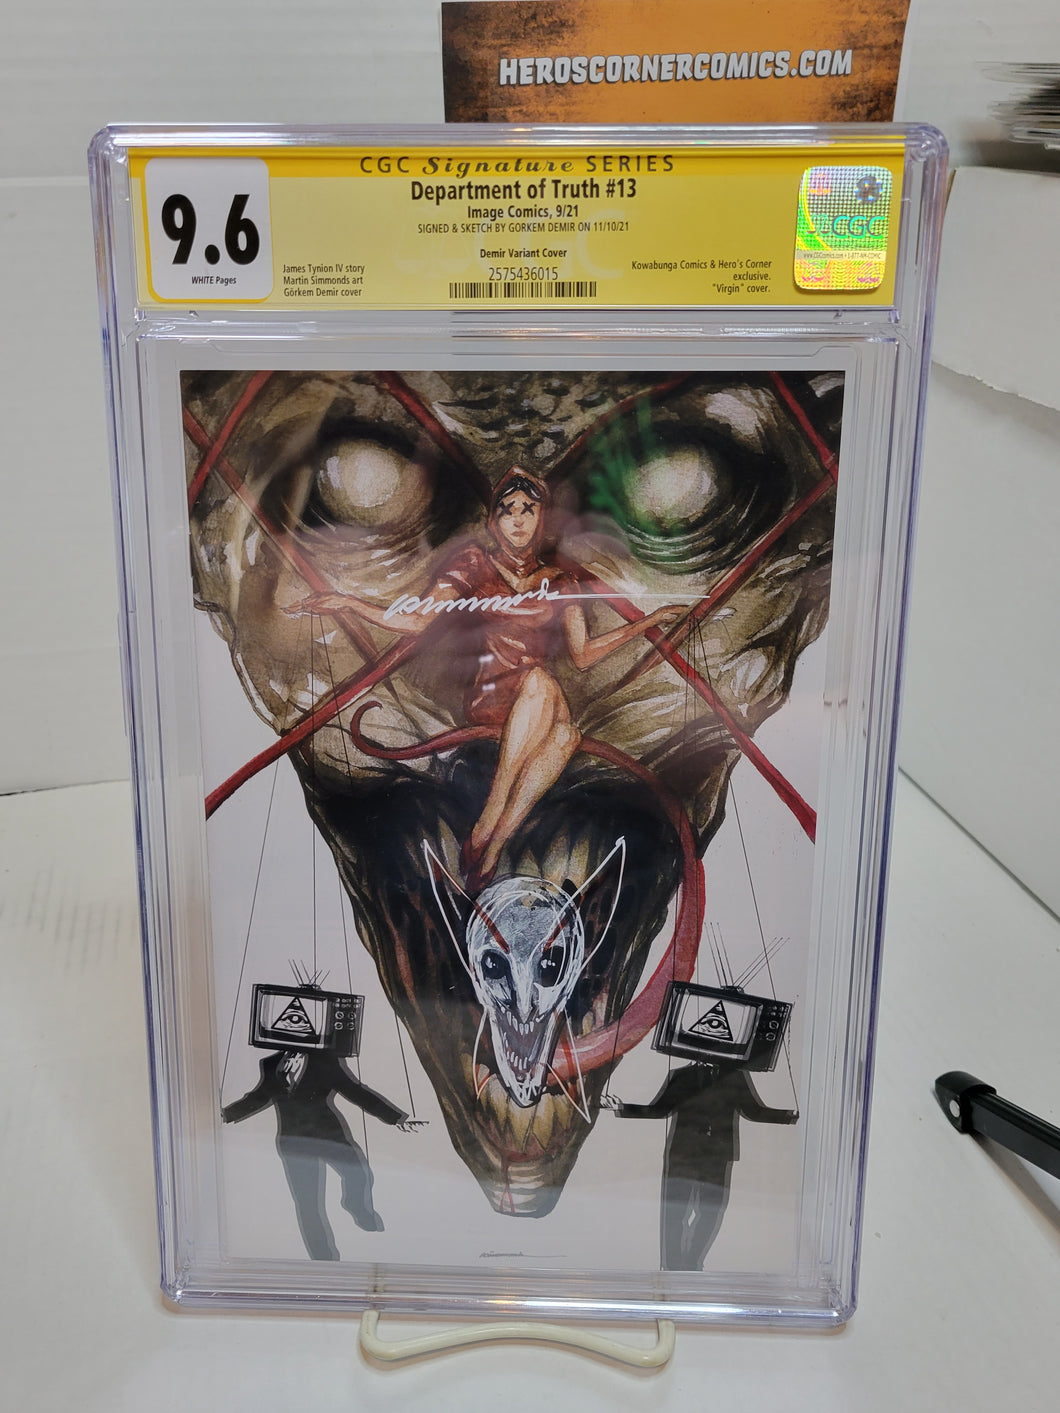 Department of Truth 13 Gorkem Demir CGC 9.6 SS Signed and Remarked